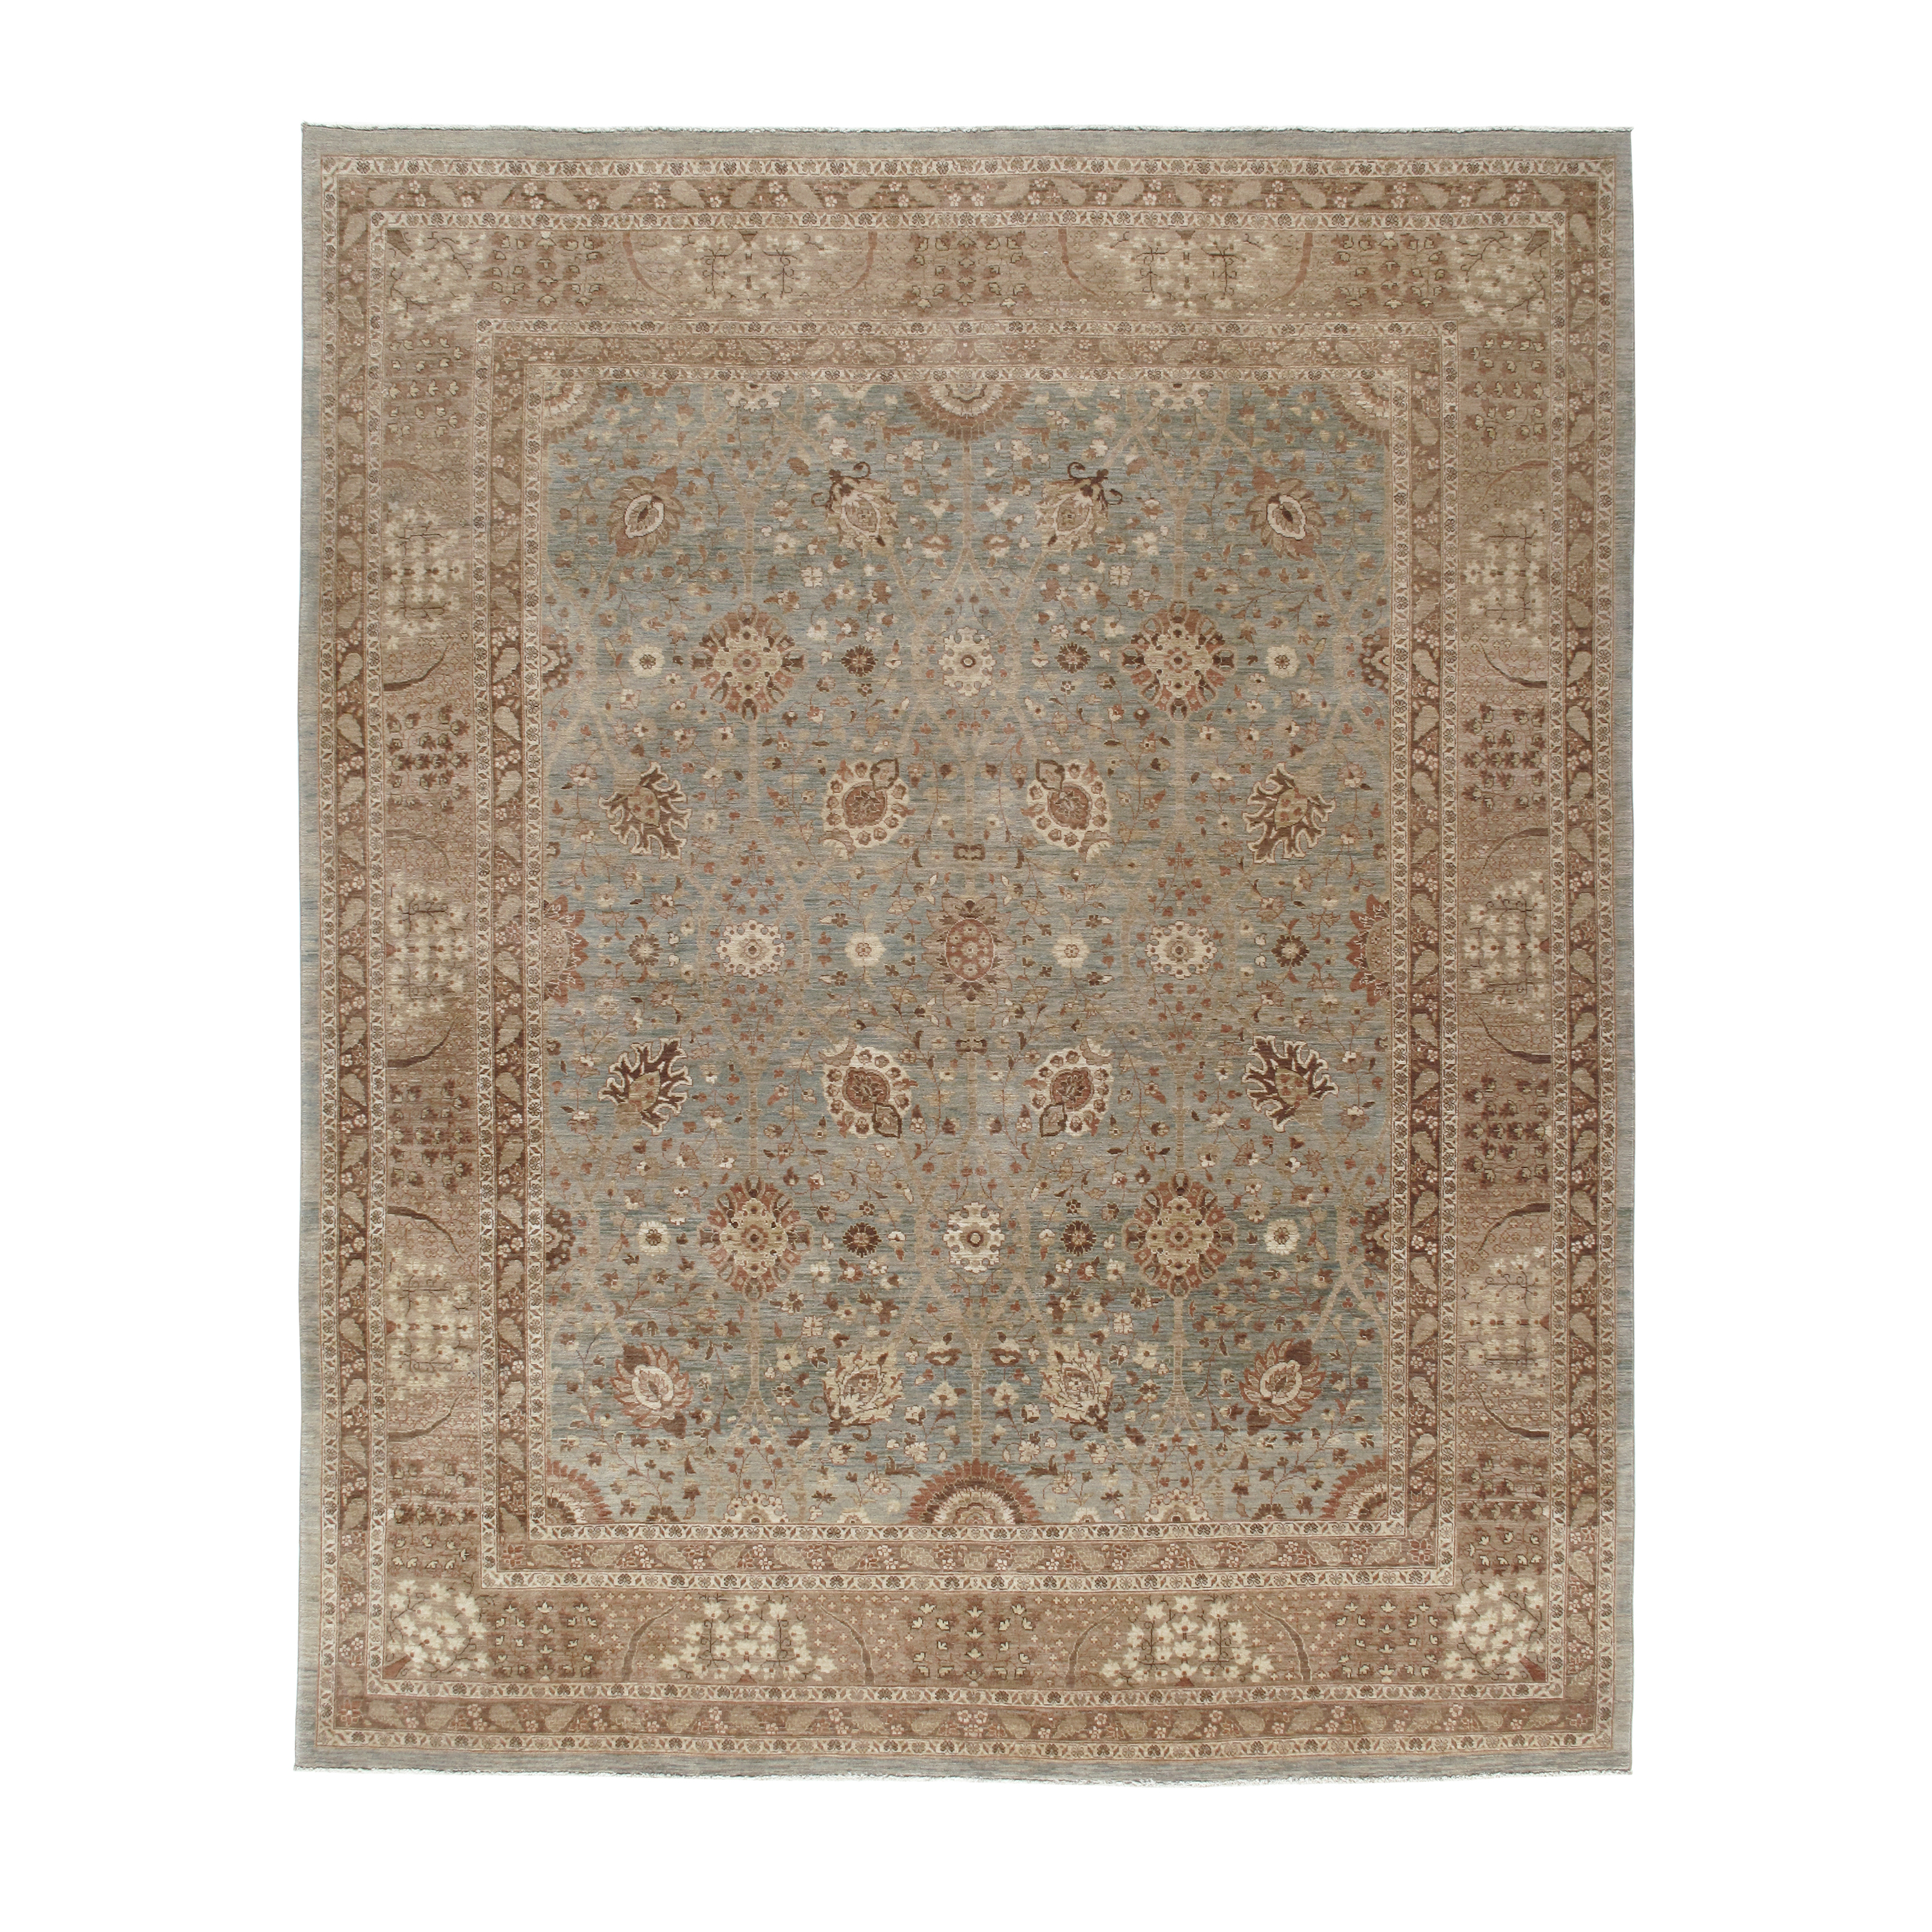 This Persian Tabriz rug is hand-knotted and made of hand-spun wool. 